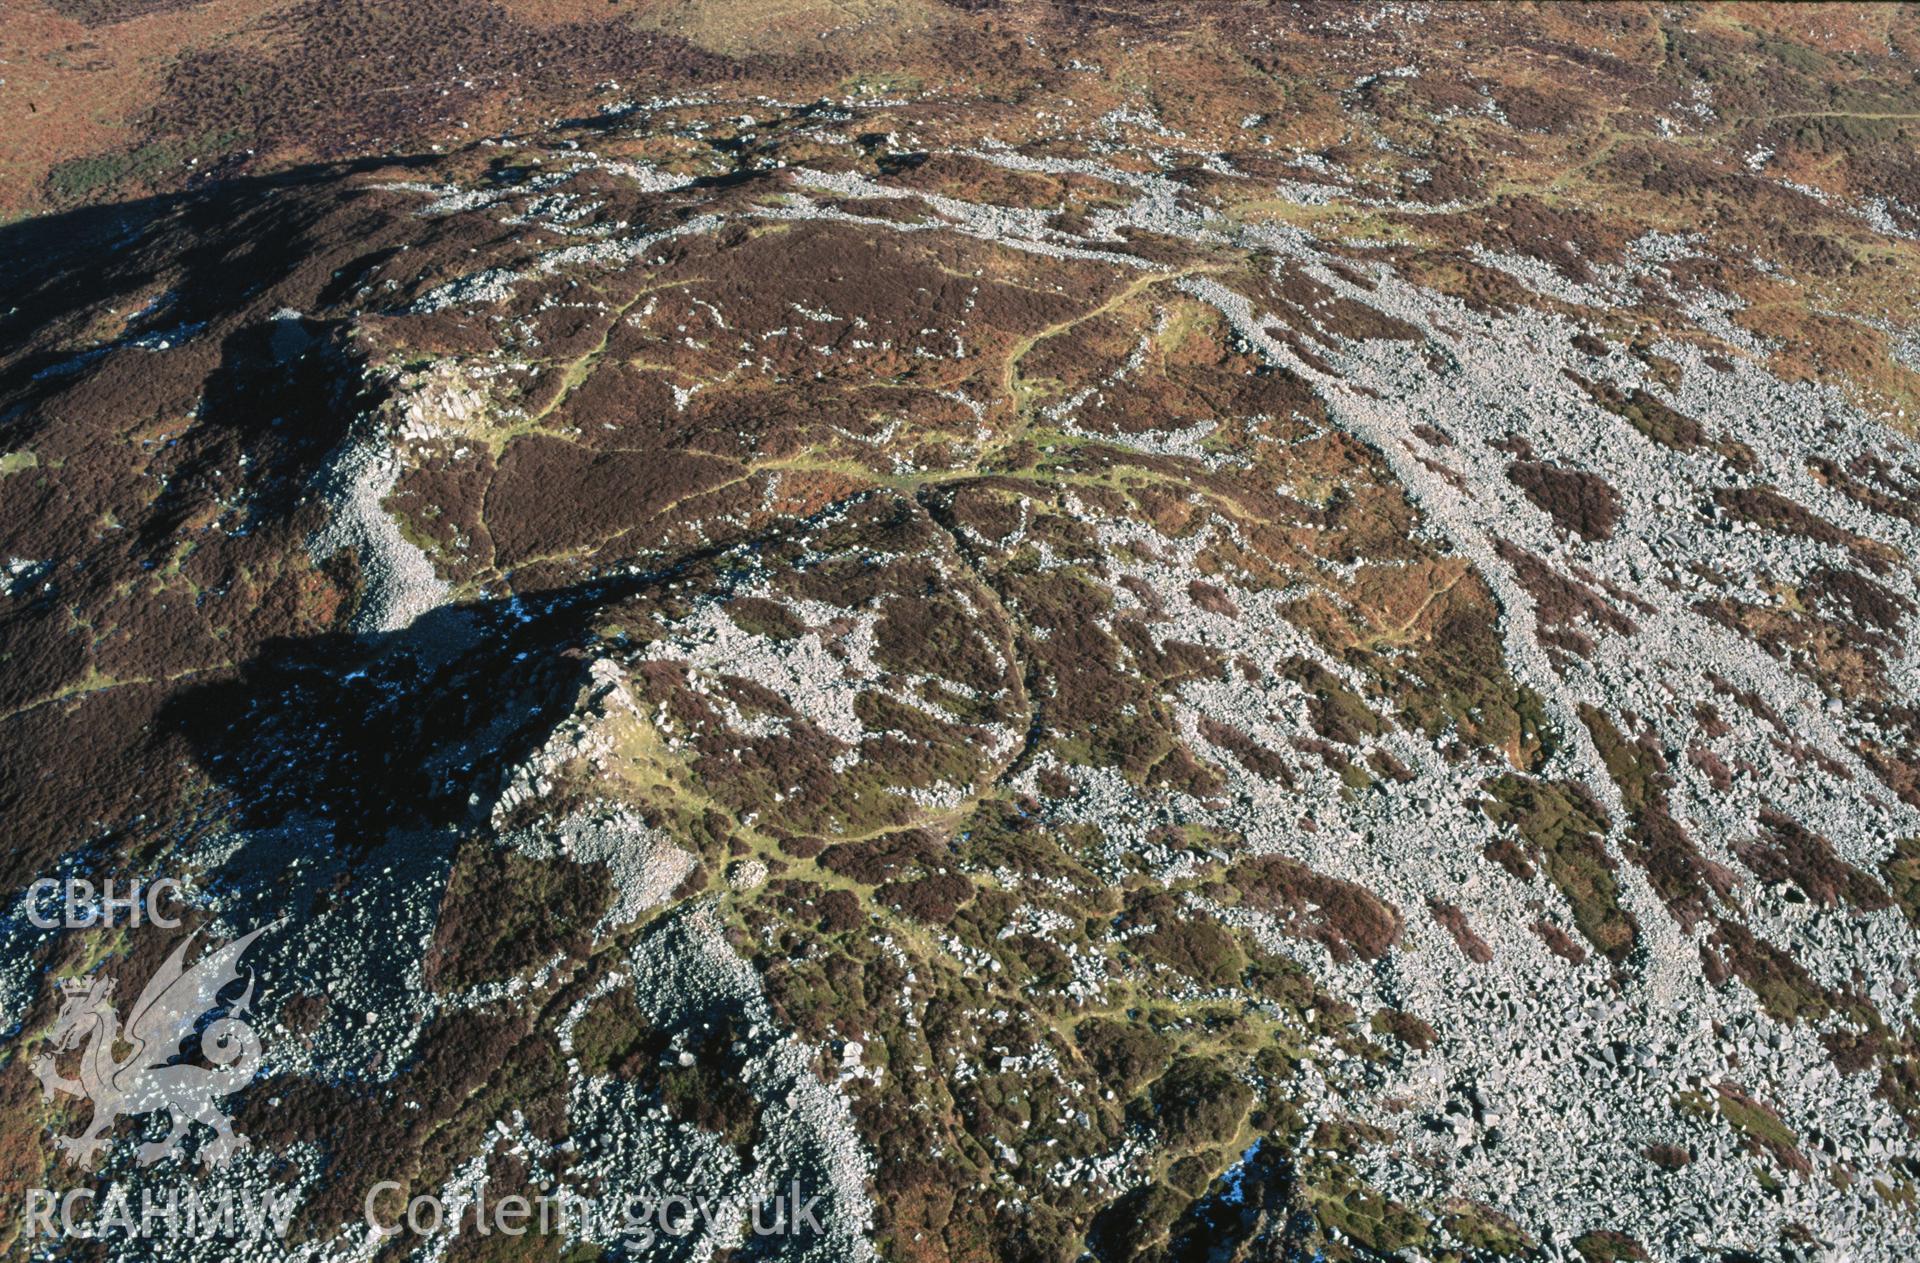 RCAHMW colour slide oblique aerial photograph of Carn Ingli Camp, Newport, taken by C.R.Musson on the 27/02/1996